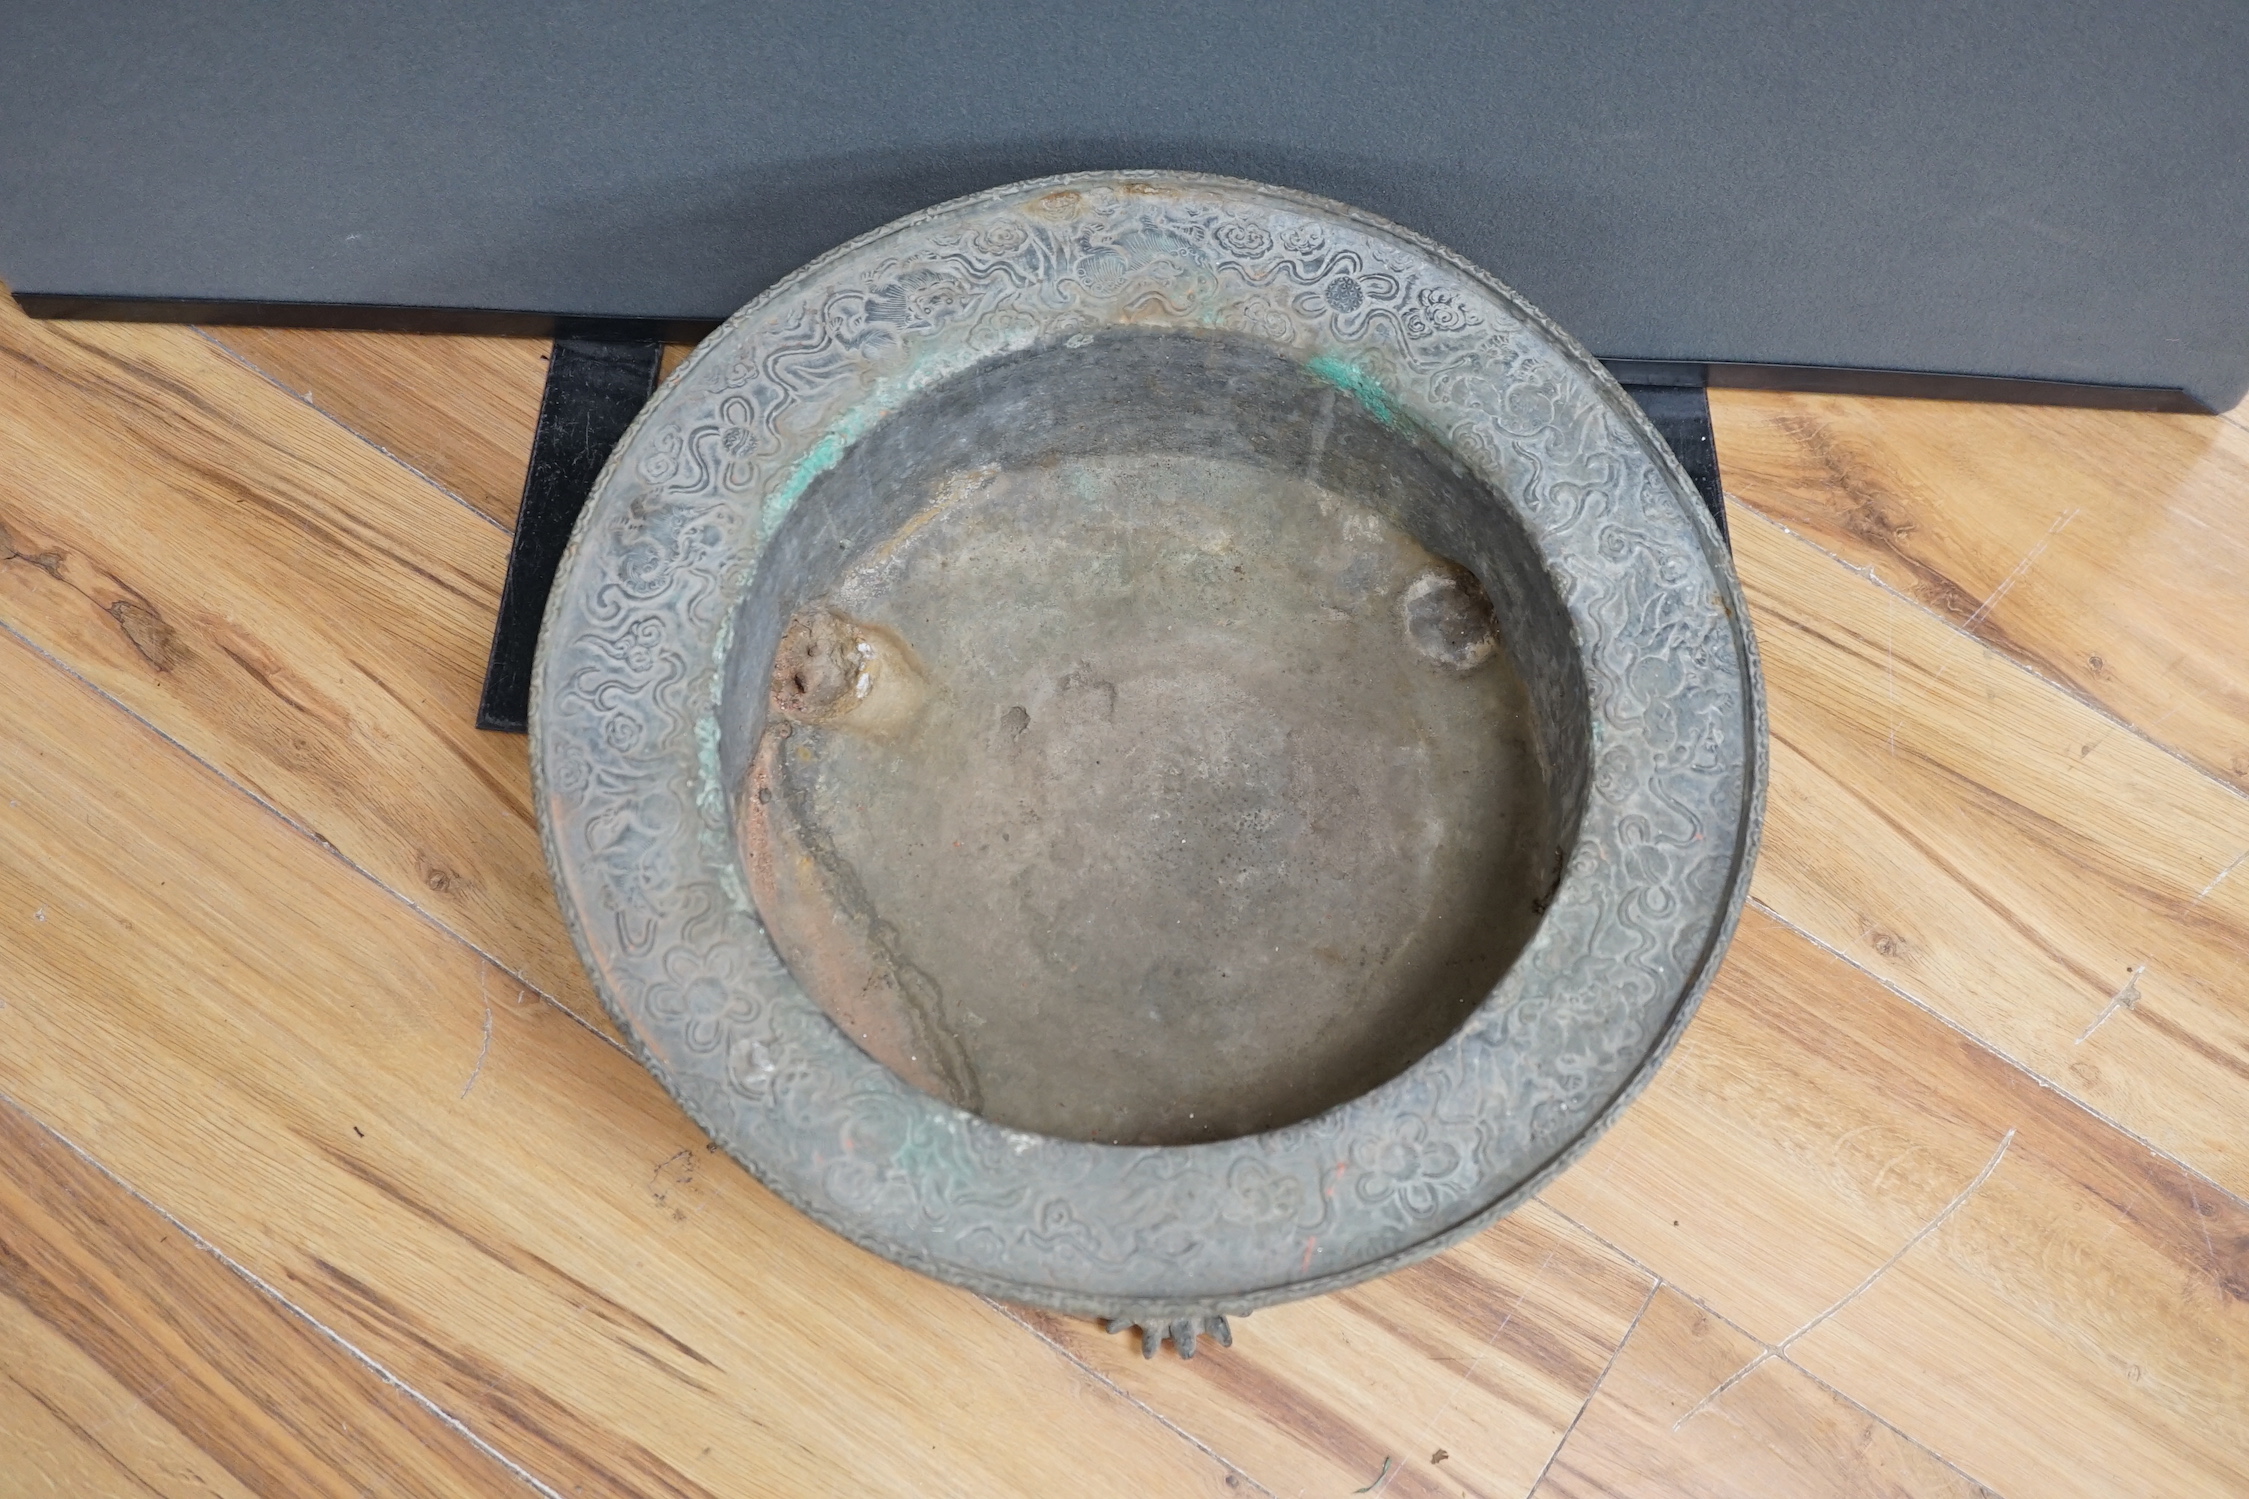 A large and heavy Chinese bronze tripod basin, Xuande mark but 19th century, the broad rim cast in relief with lions, brocaded balls and ribbons, the sides with dragons chasing flaming pearls, on three mythical beast hea